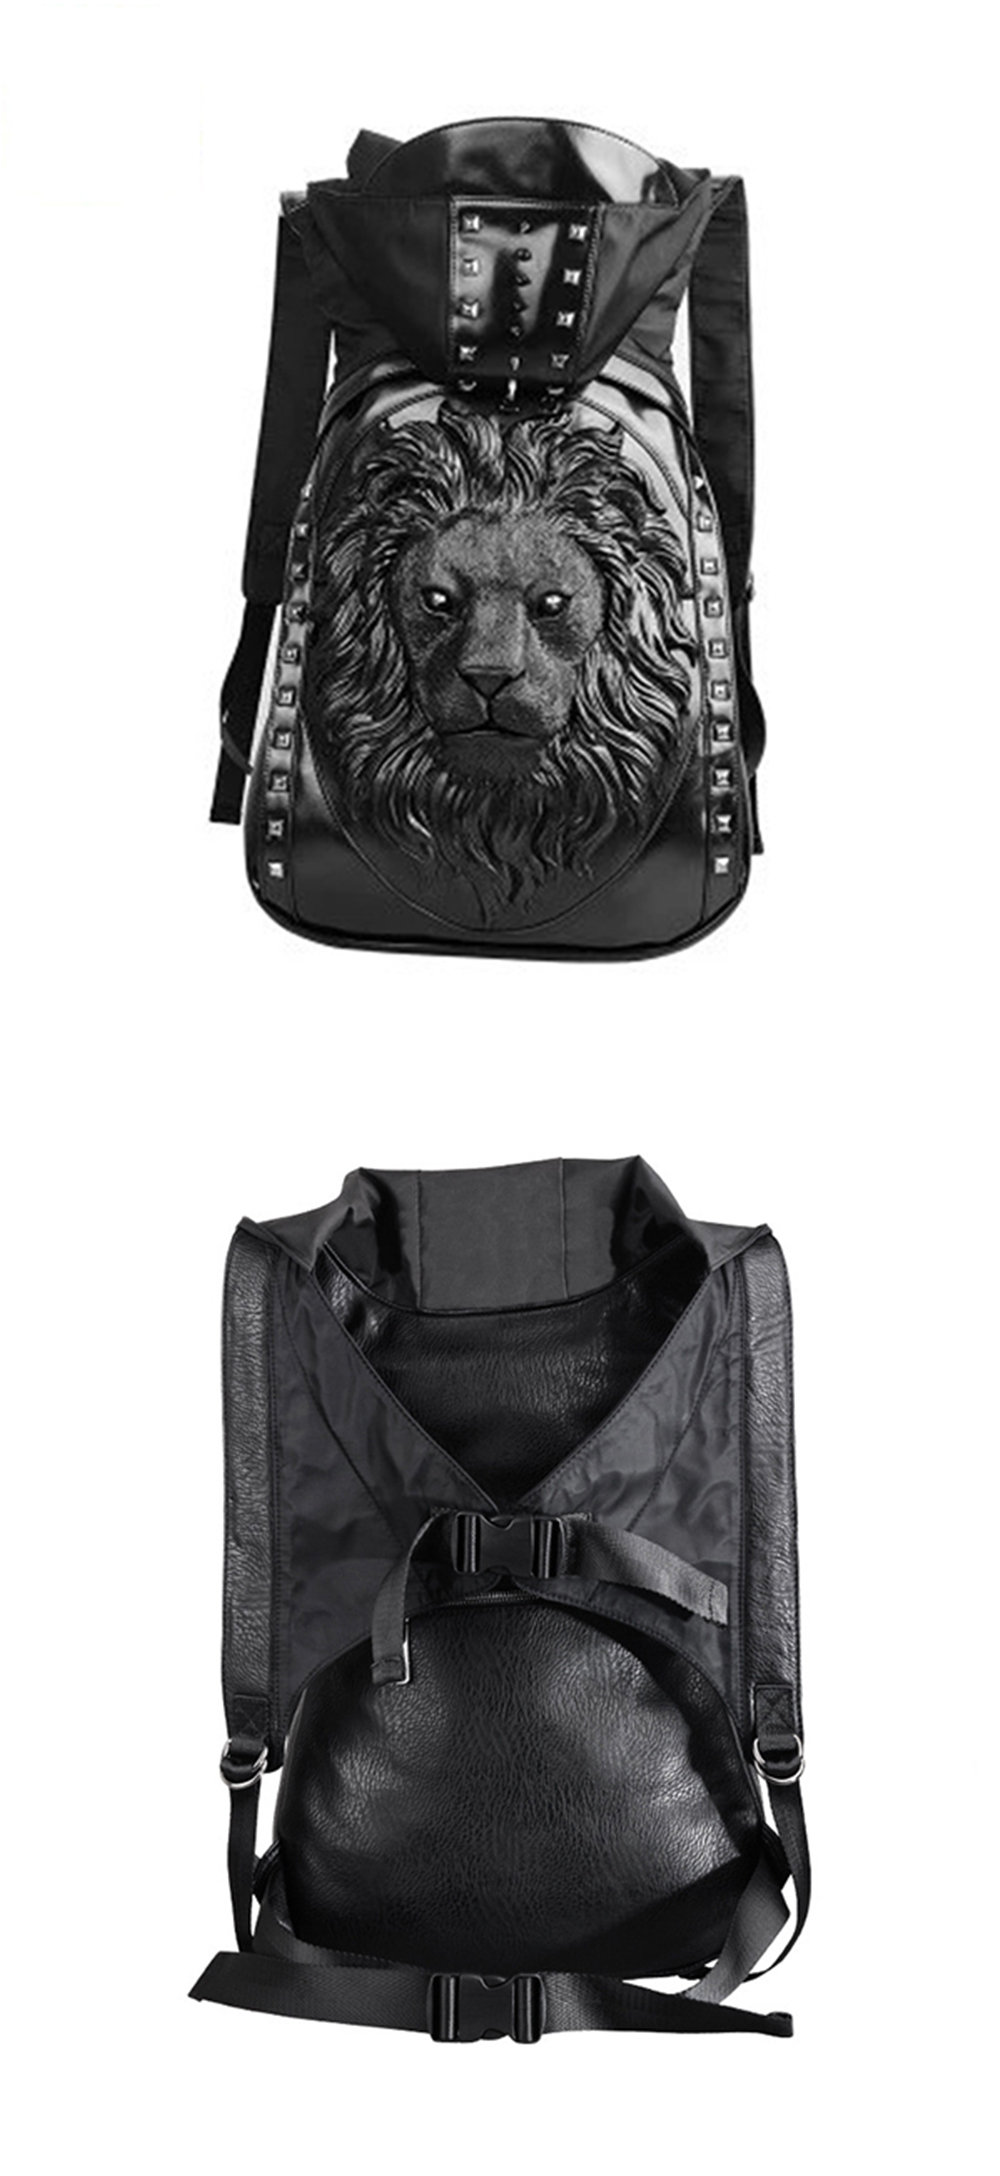 Buy Tote Bag With Lion Head for Cat Lovers Online in India - Etsy